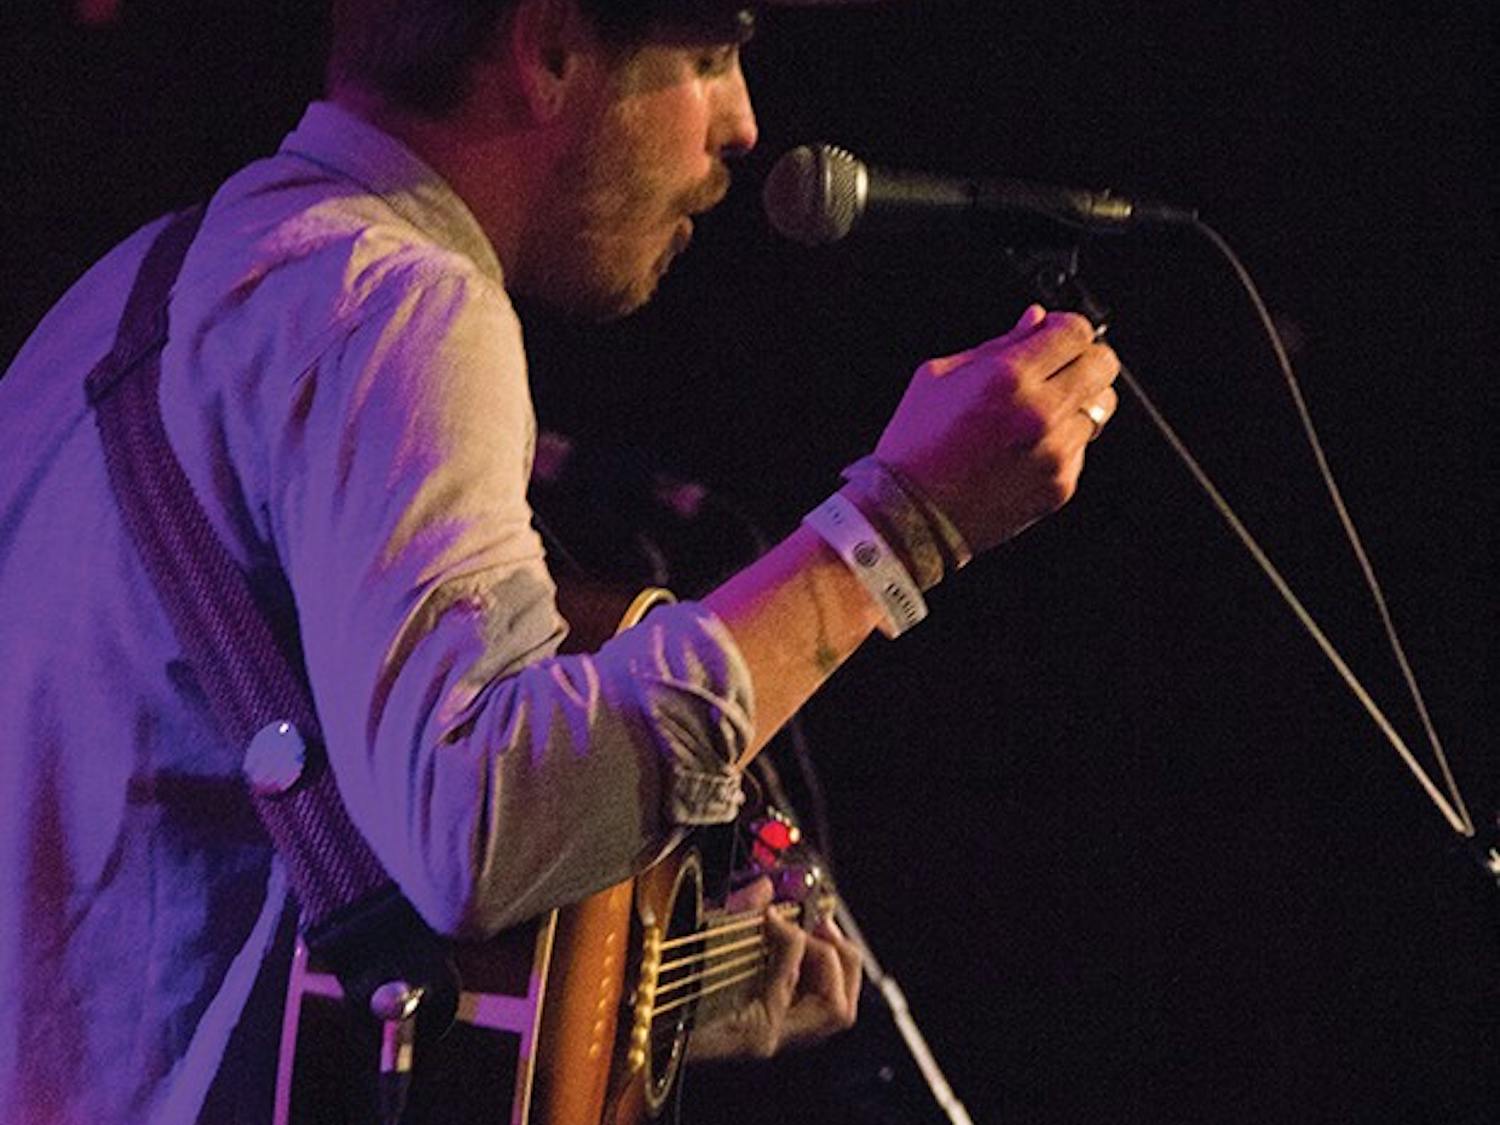 American Longspurs frontman, Zach Zimmerman, performs at an all-ages free show at Crescent Ballroom. Photo by Noemi Gonzalez